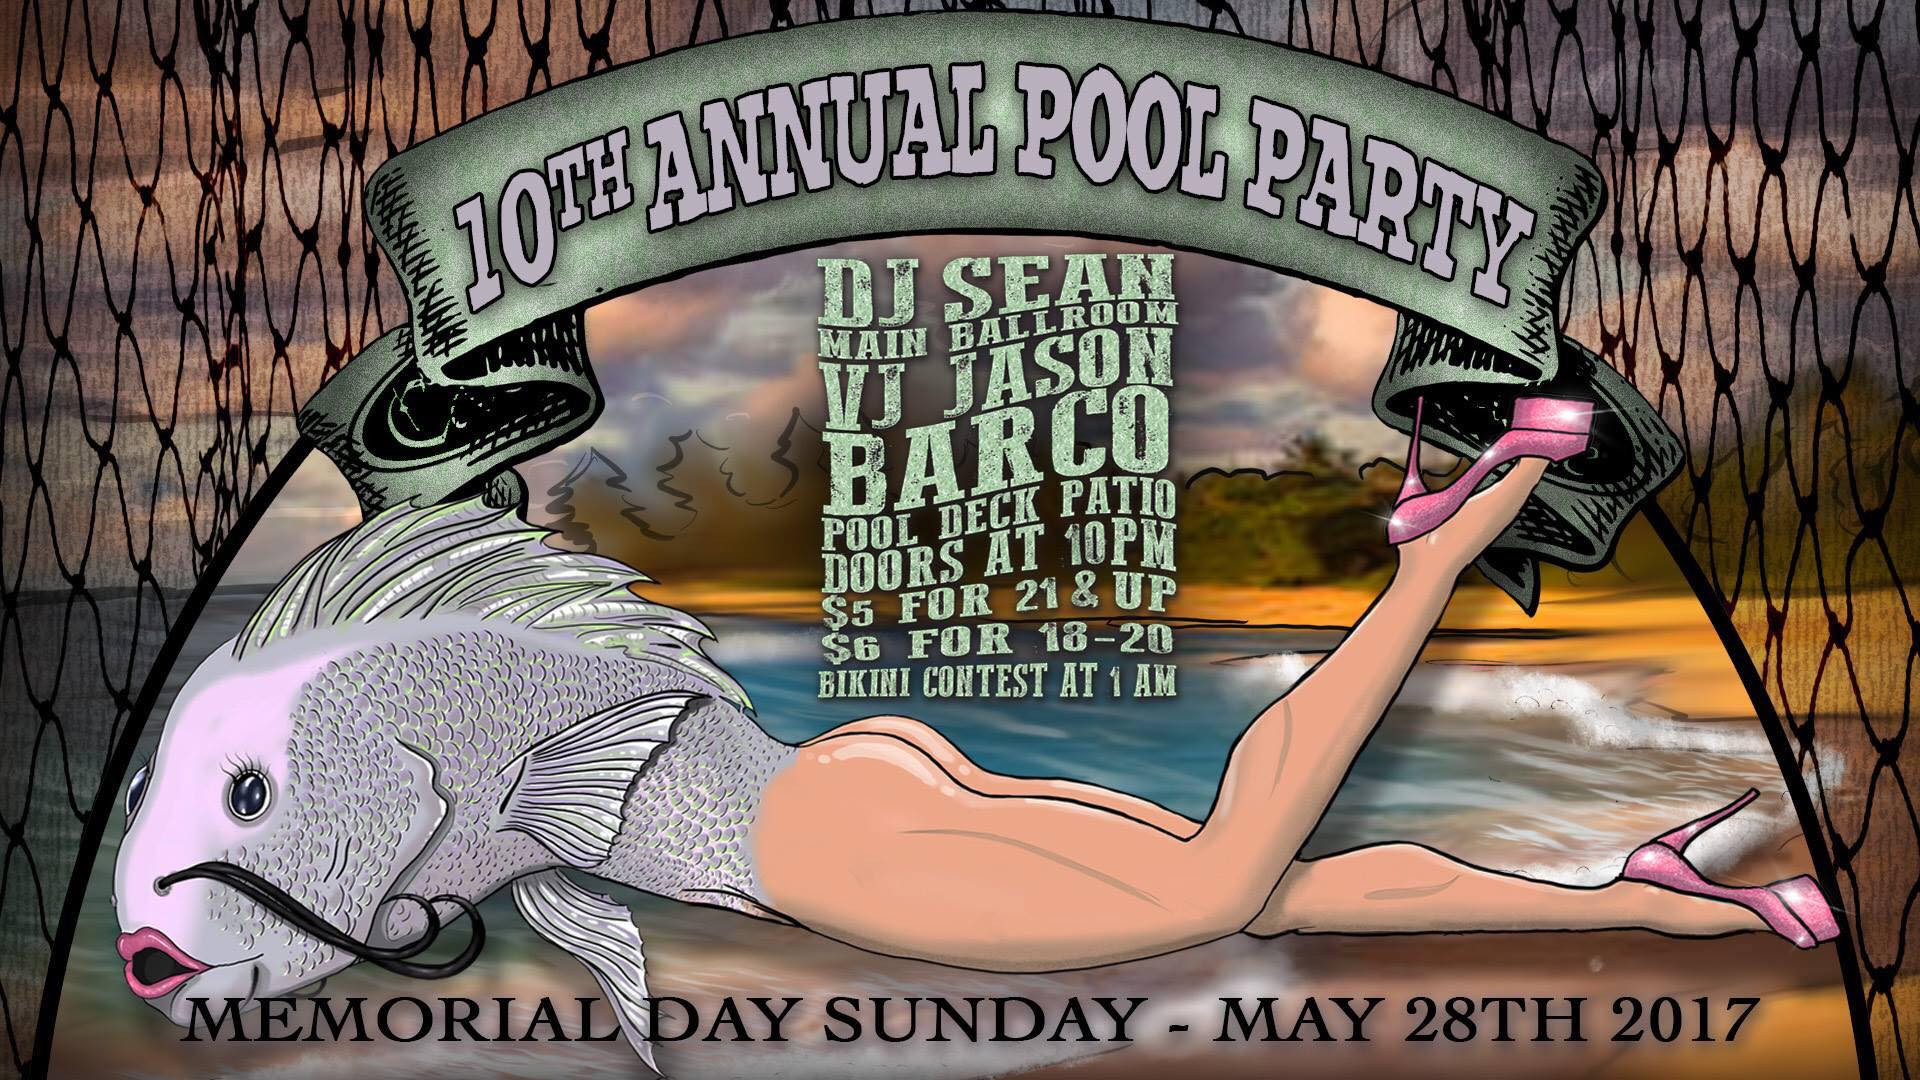 Memorial Day Pool Party
 10th Annual Memorial DAY POOL PARTY – Sunday May 28